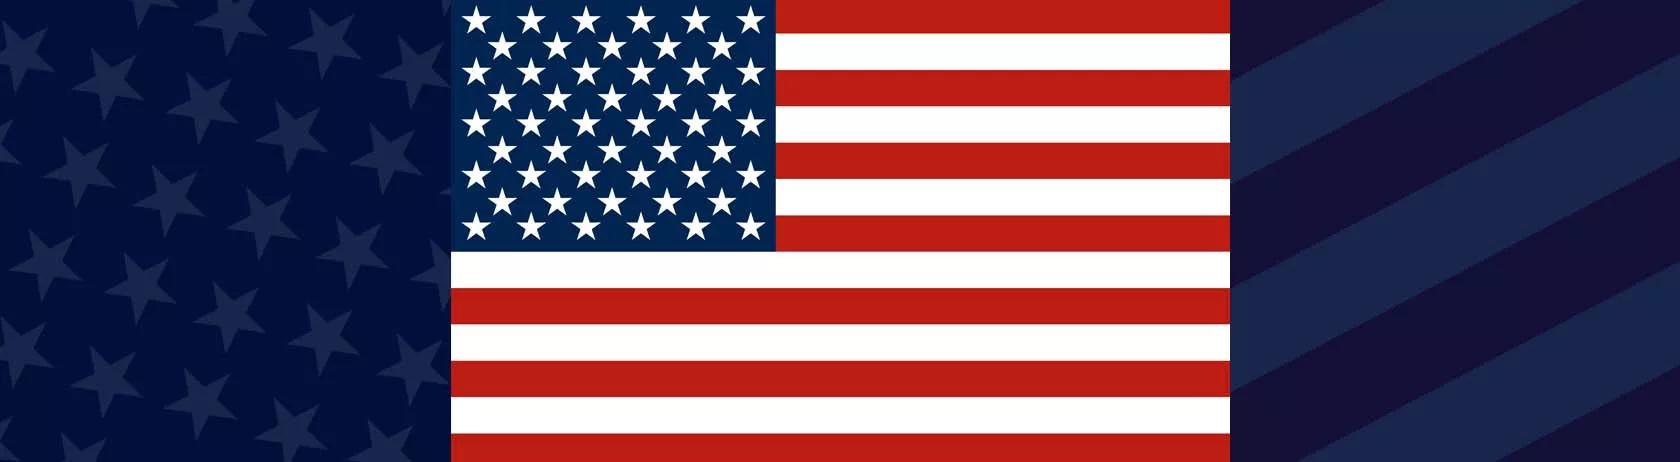 American flag to show US fastener standards